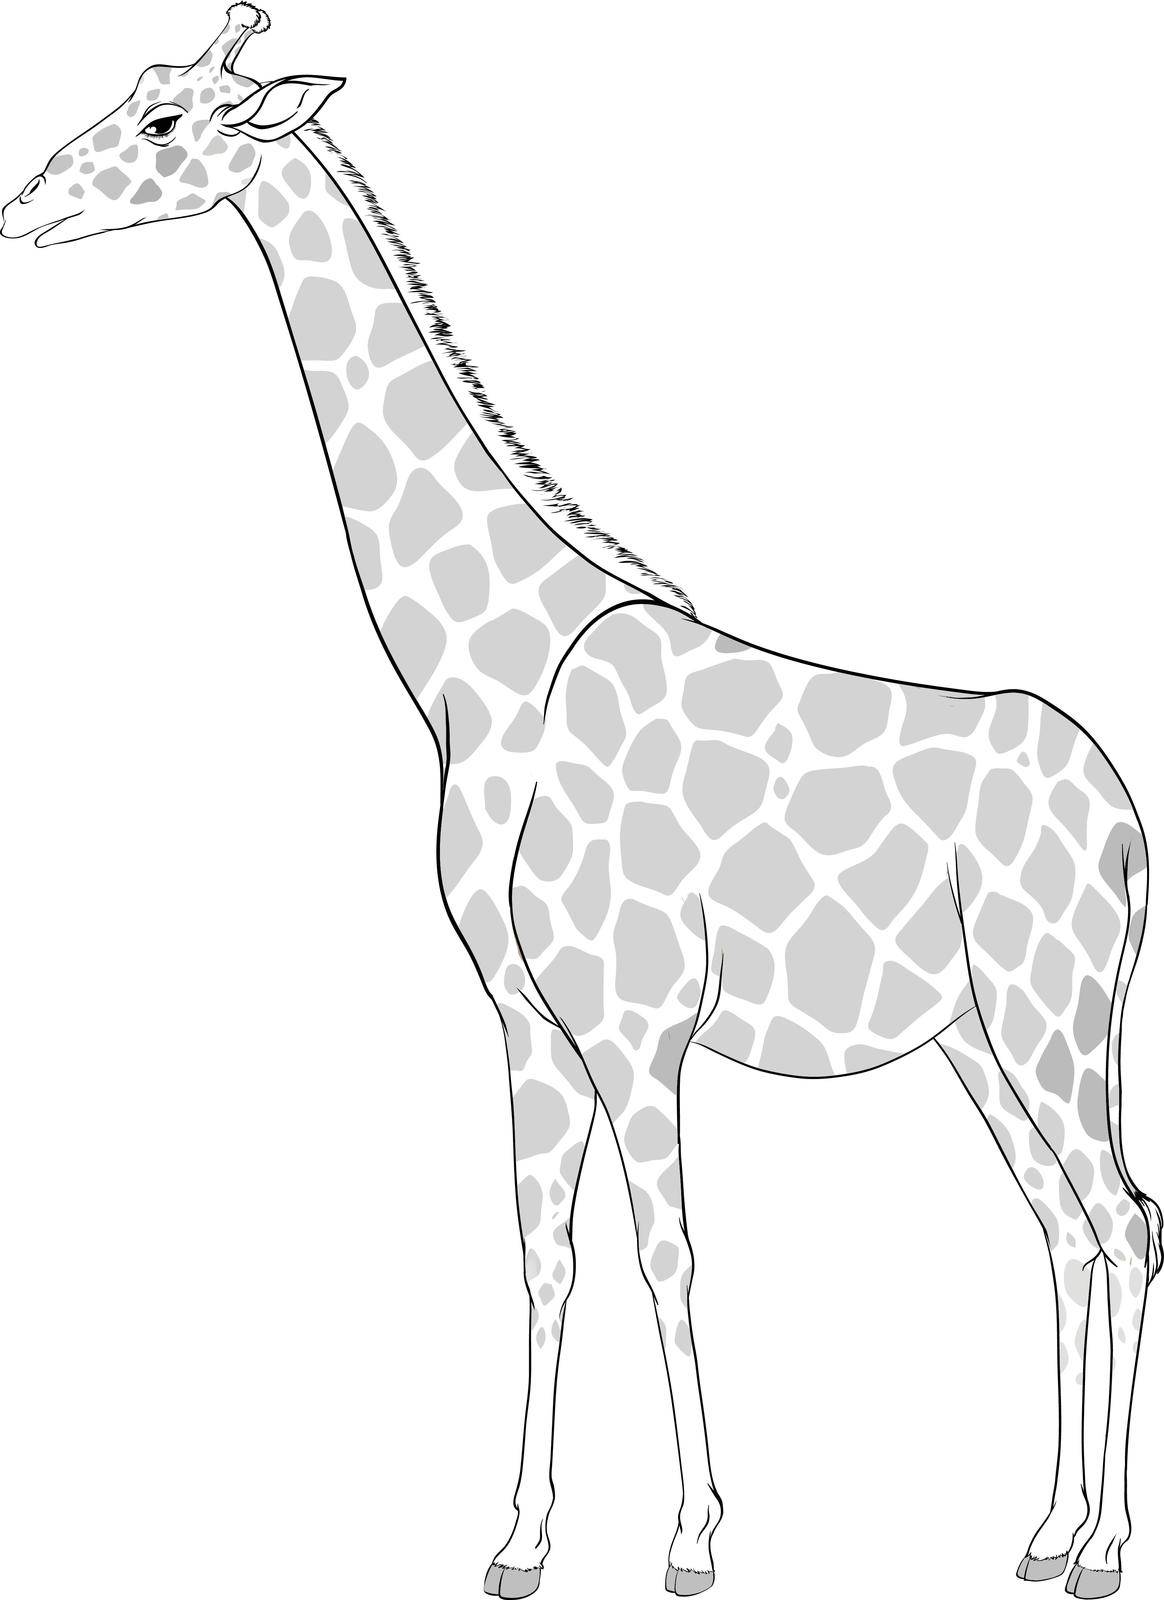 Illustration of a sketch of a giraffe on a white background